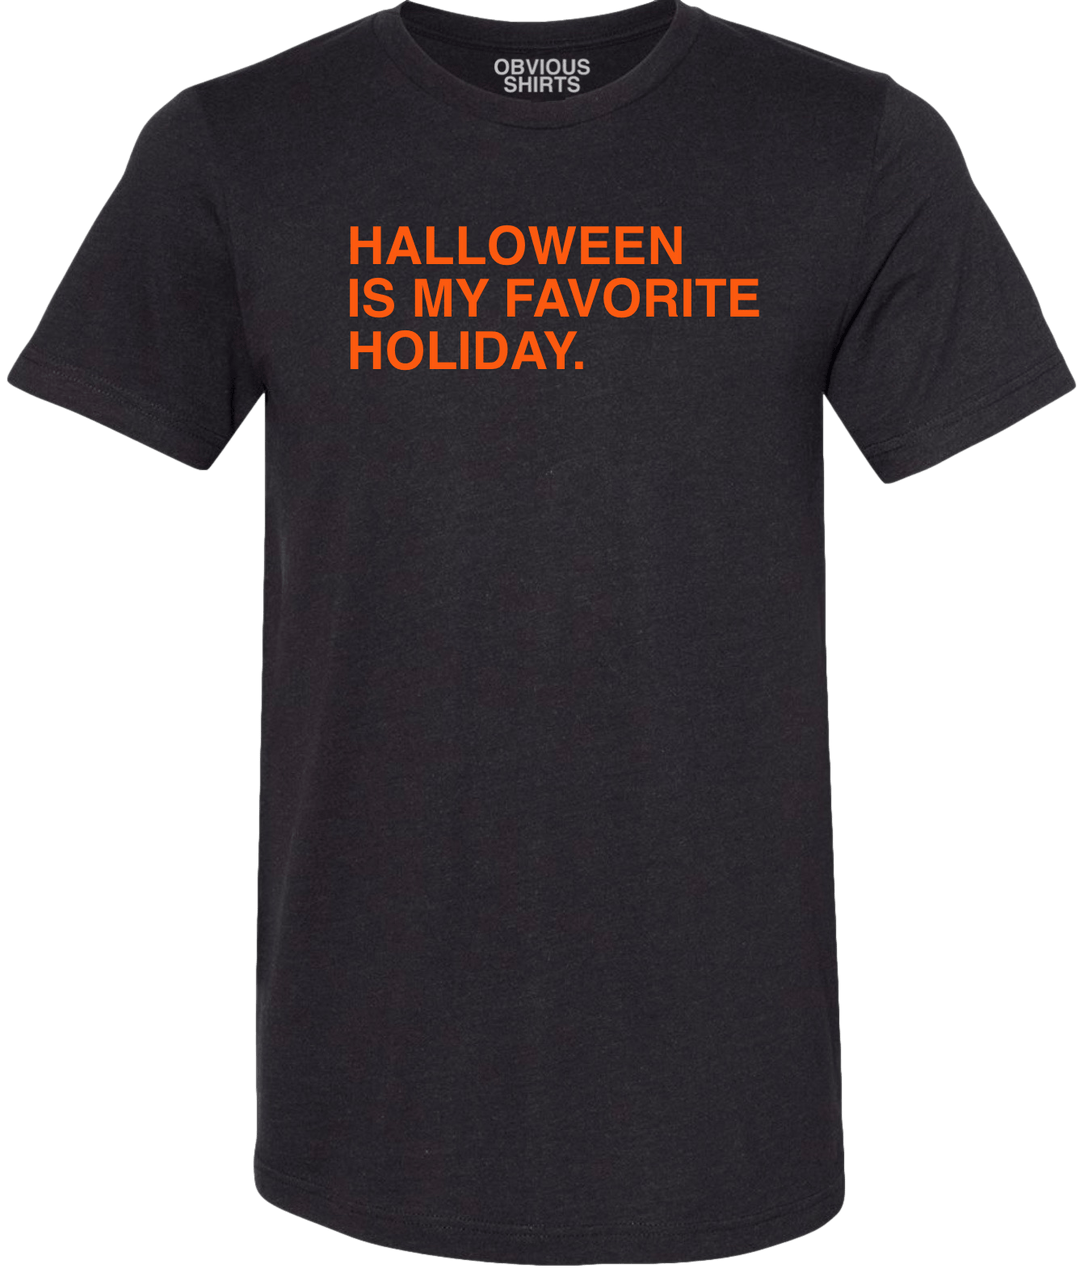 HALLOWEEN IS MY FAVORITE HOLIDAY. - OBVIOUS SHIRTS